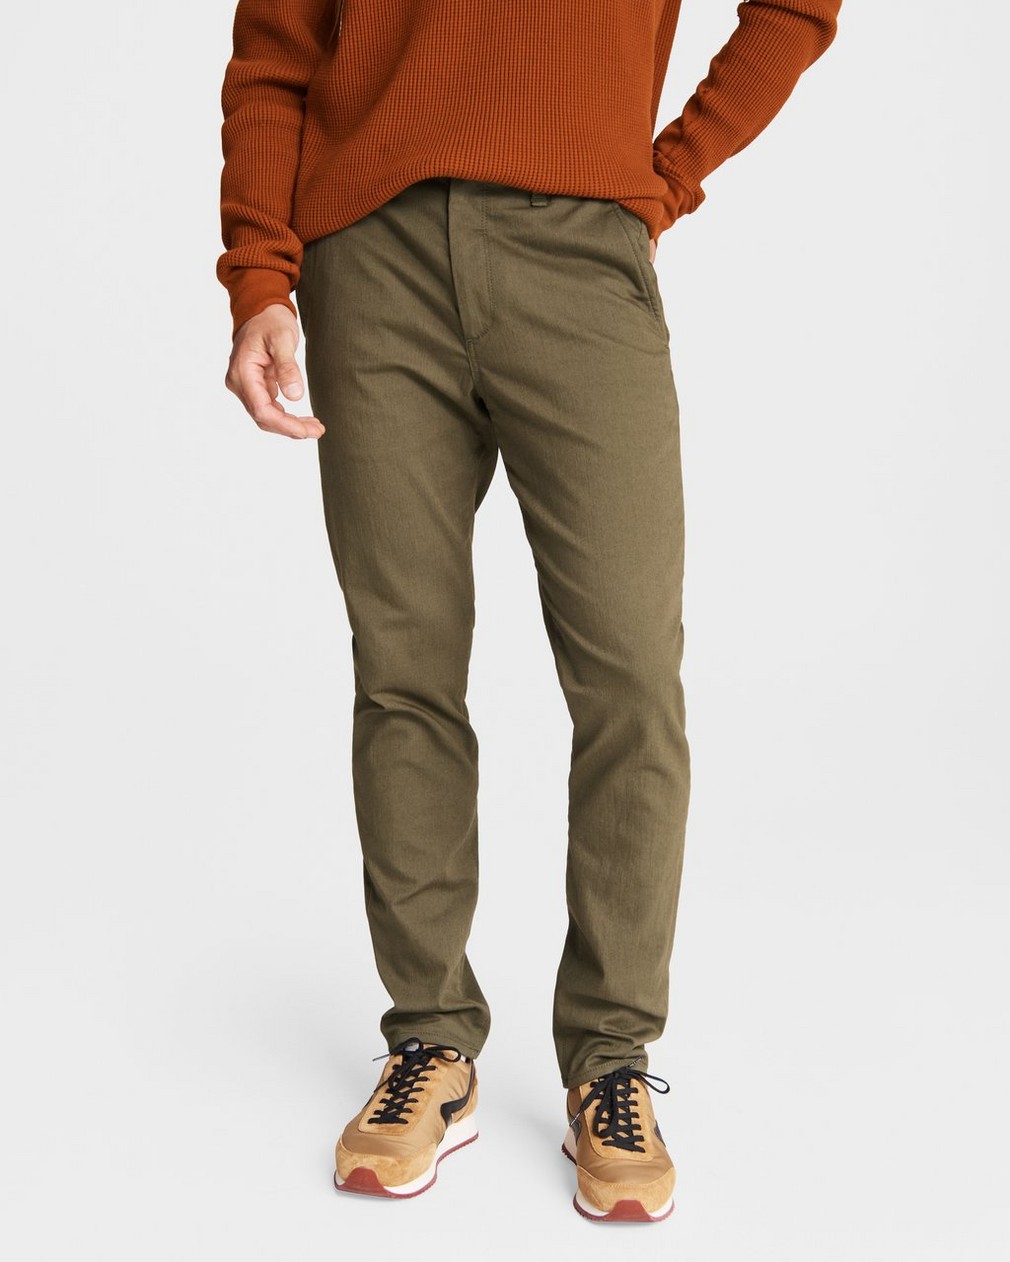 Fit 2 - Brushed Back Cotton Chino